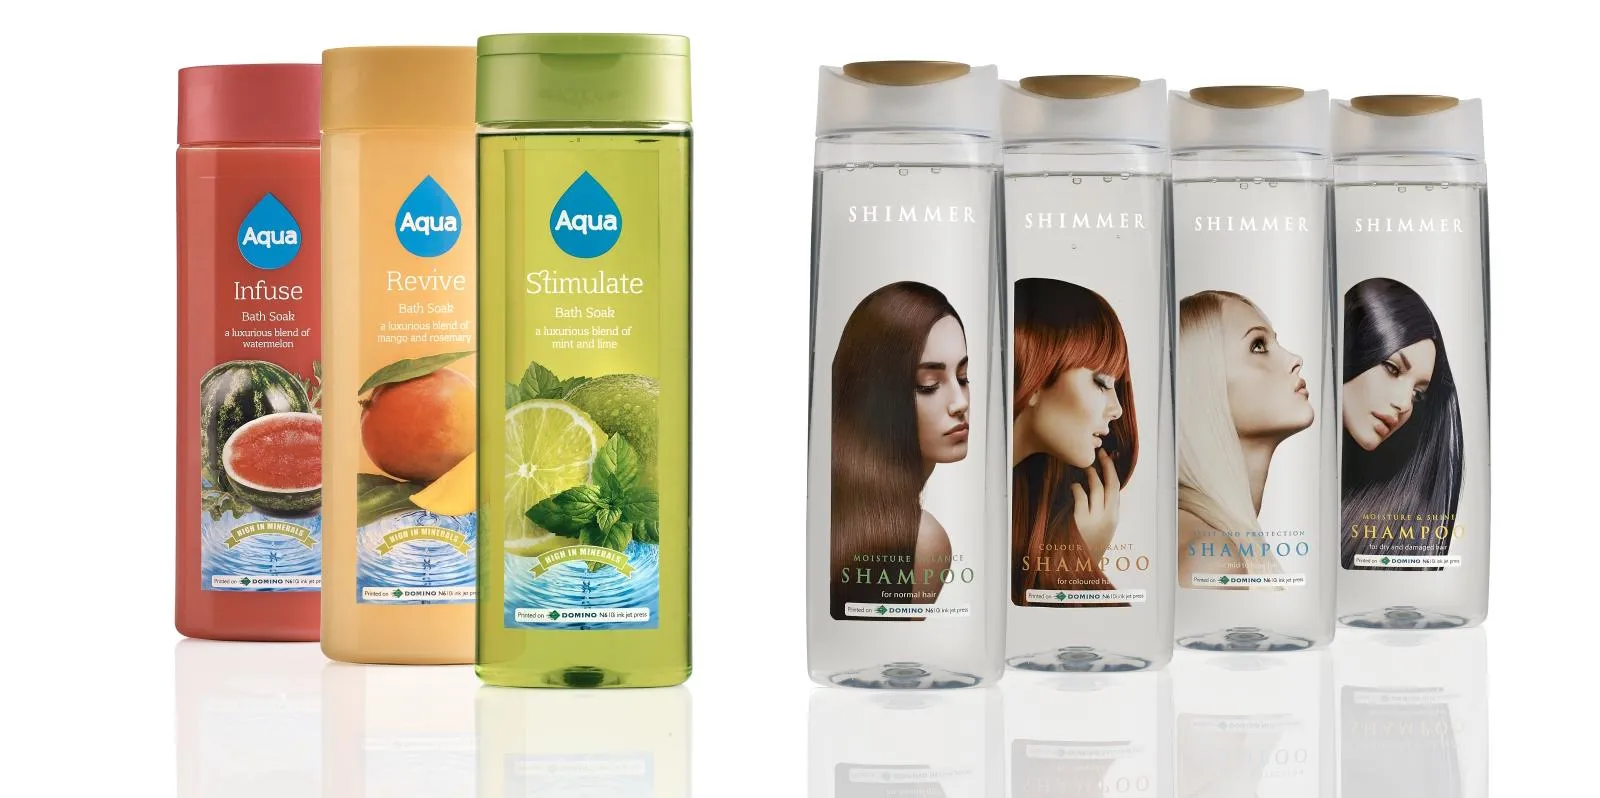 SKU proliferation in the personal care sector